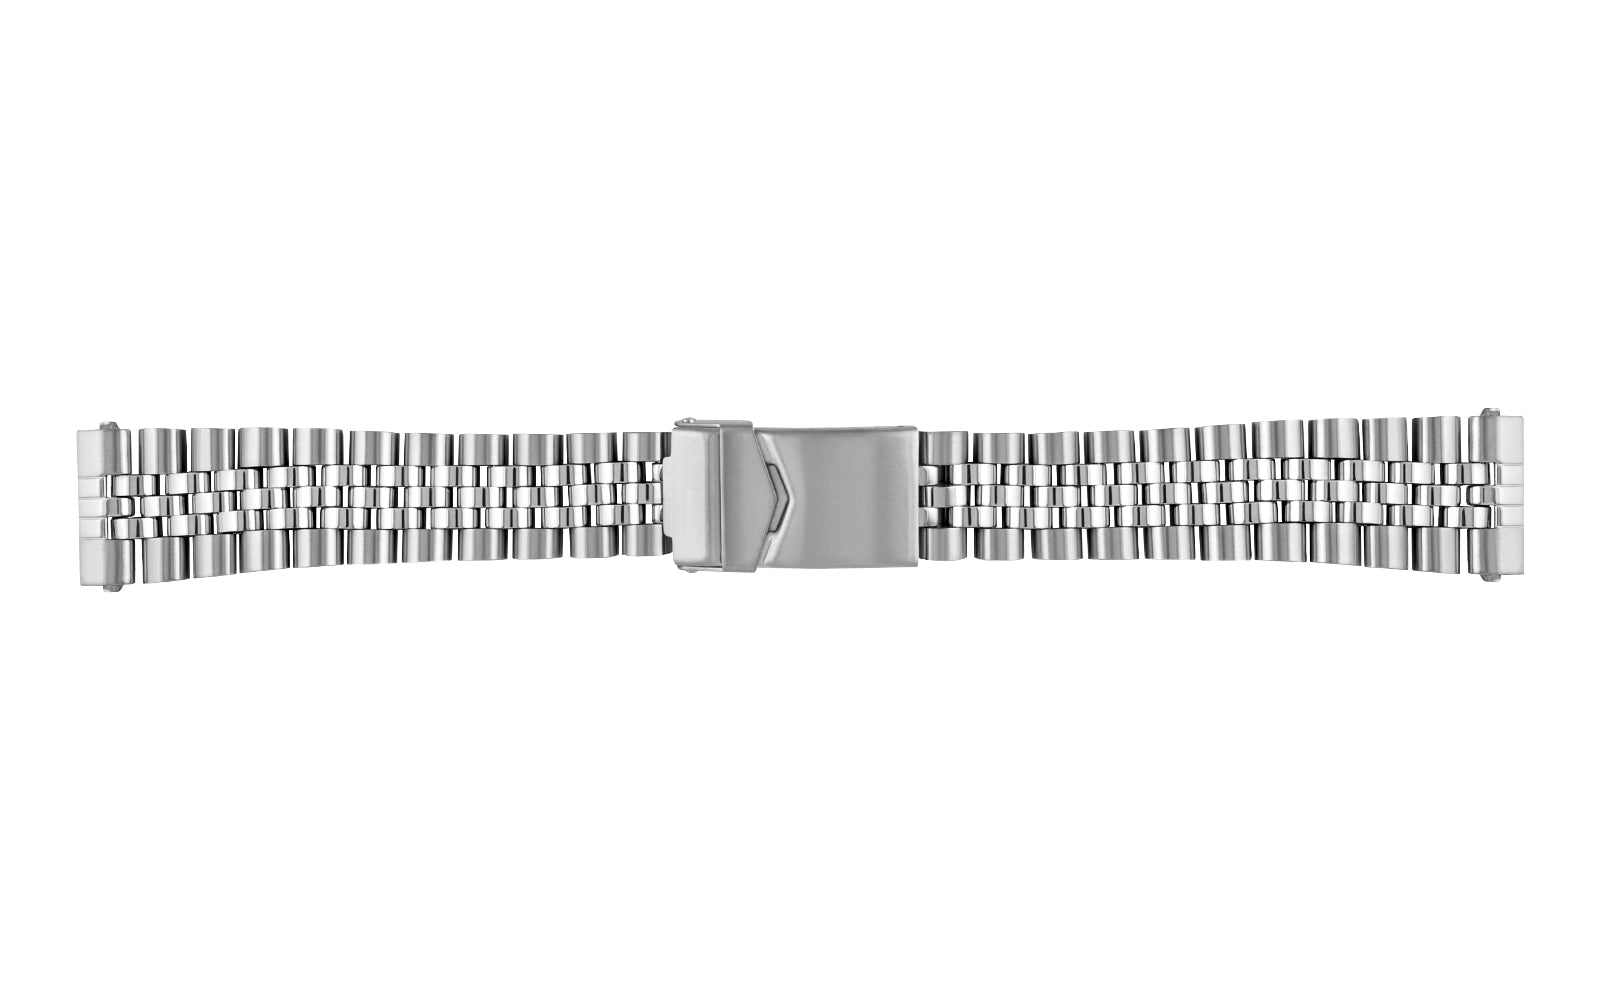 18 MM Steel Bracelet Watch Band Strap Replacement Jubilee Vintage Fits For  Seiko | eBay